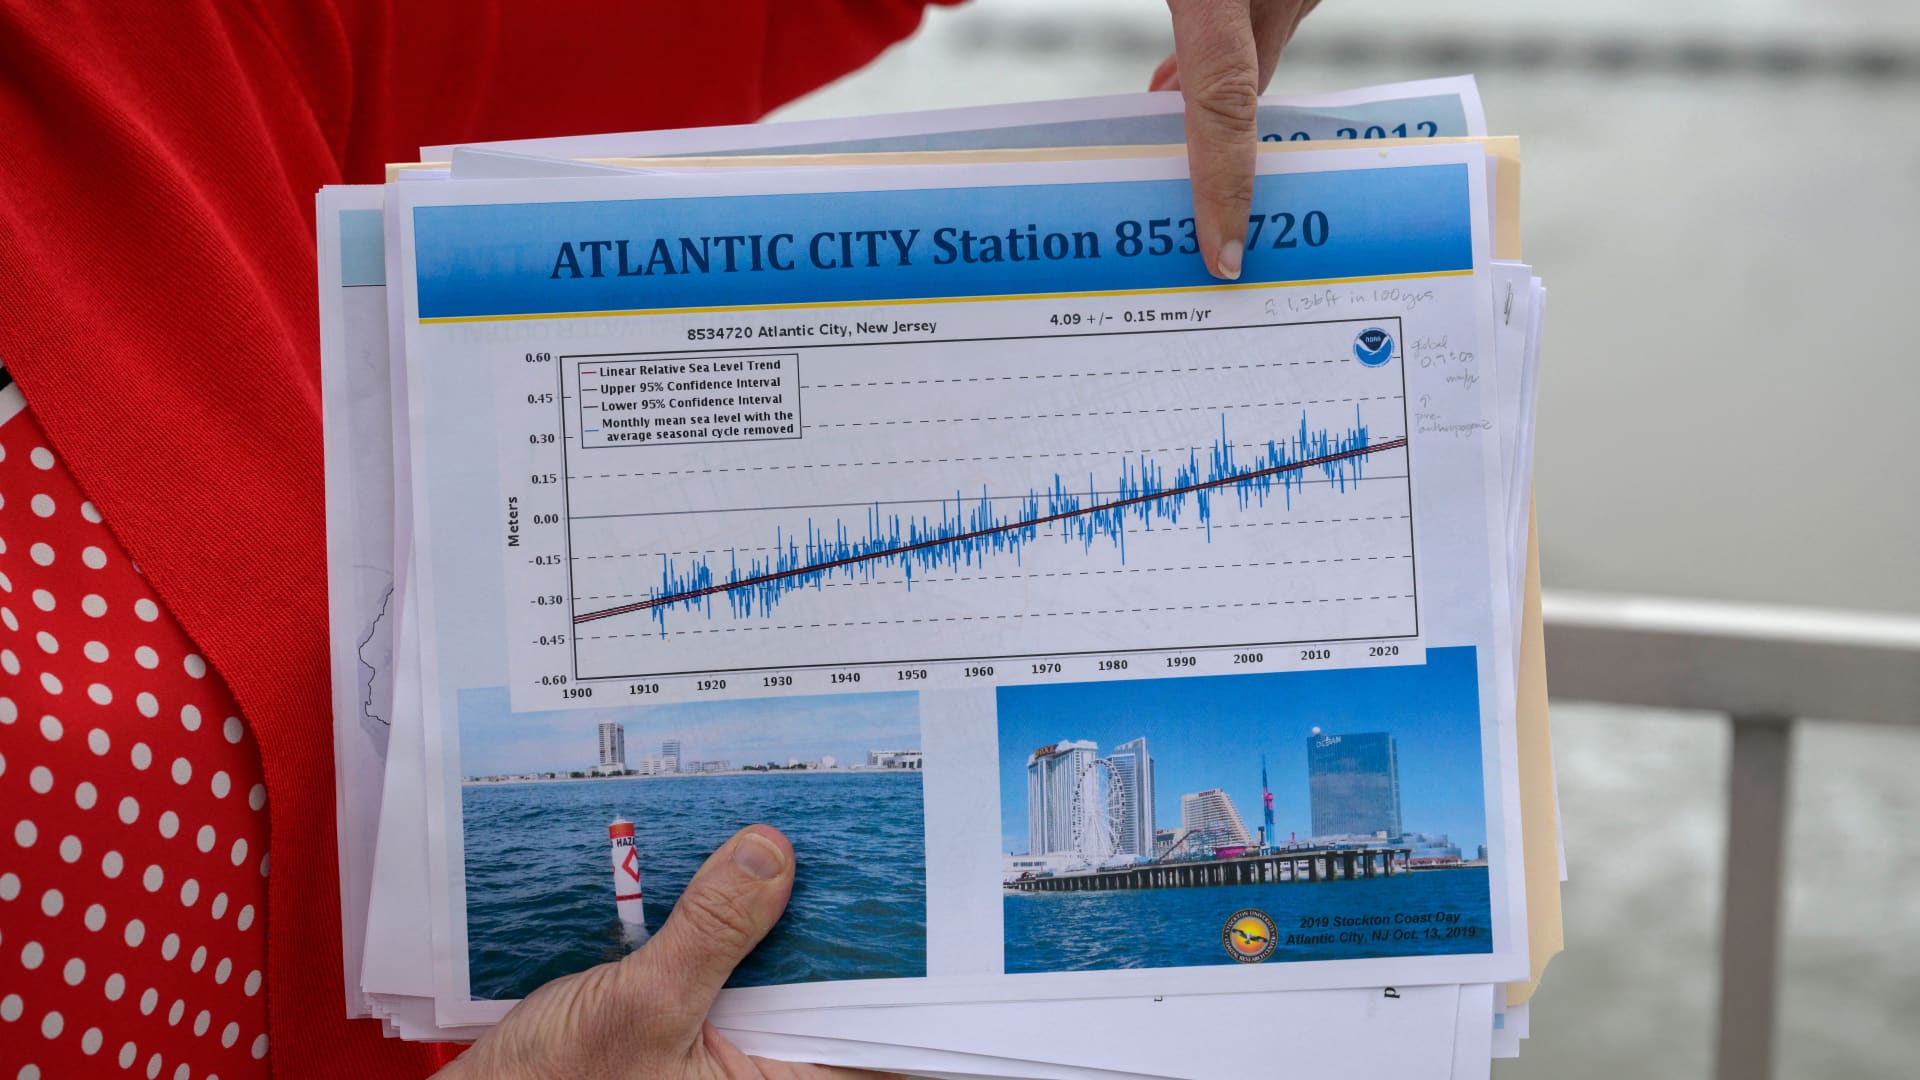 Kimberly McKenna, Associate Director at Stockton University Coastal Research Center points at a graph indicating rising sea levels in Atlantic City, New Jersey on October 26, 2022. Ten years after the devastating hurricane Sandy, the seaside town of Atlantic City, on the American east coast, has fortified its famous promenade between its casinos and the Atlantic Ocean. But behind the beaches, for the inhabitants of certain neighborhoods, the flooded streets are almost part of everyday life.